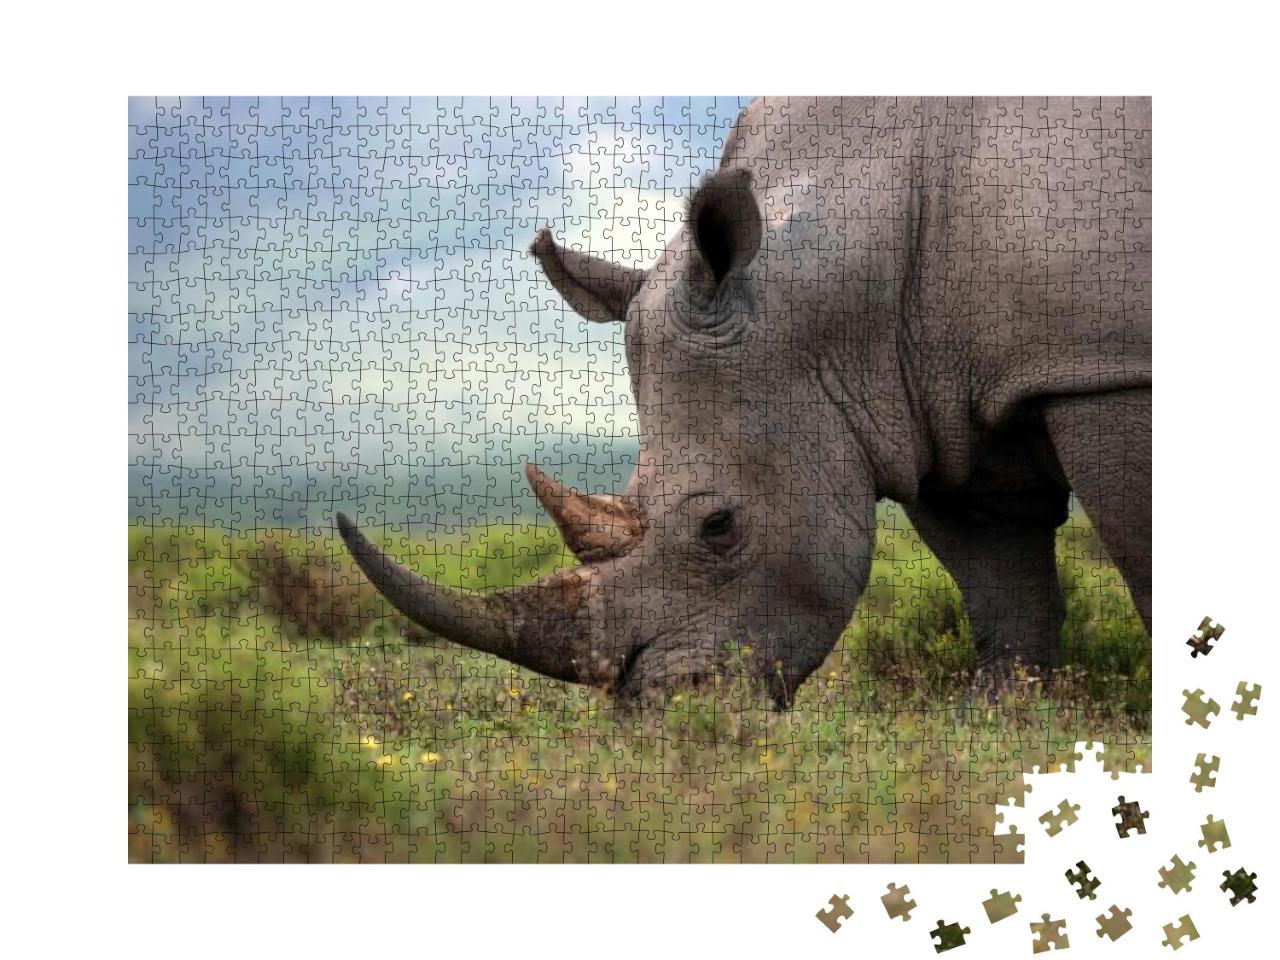 A Close Up Photo of an Endangered White Rhino / Rhinocero... Jigsaw Puzzle with 1000 pieces